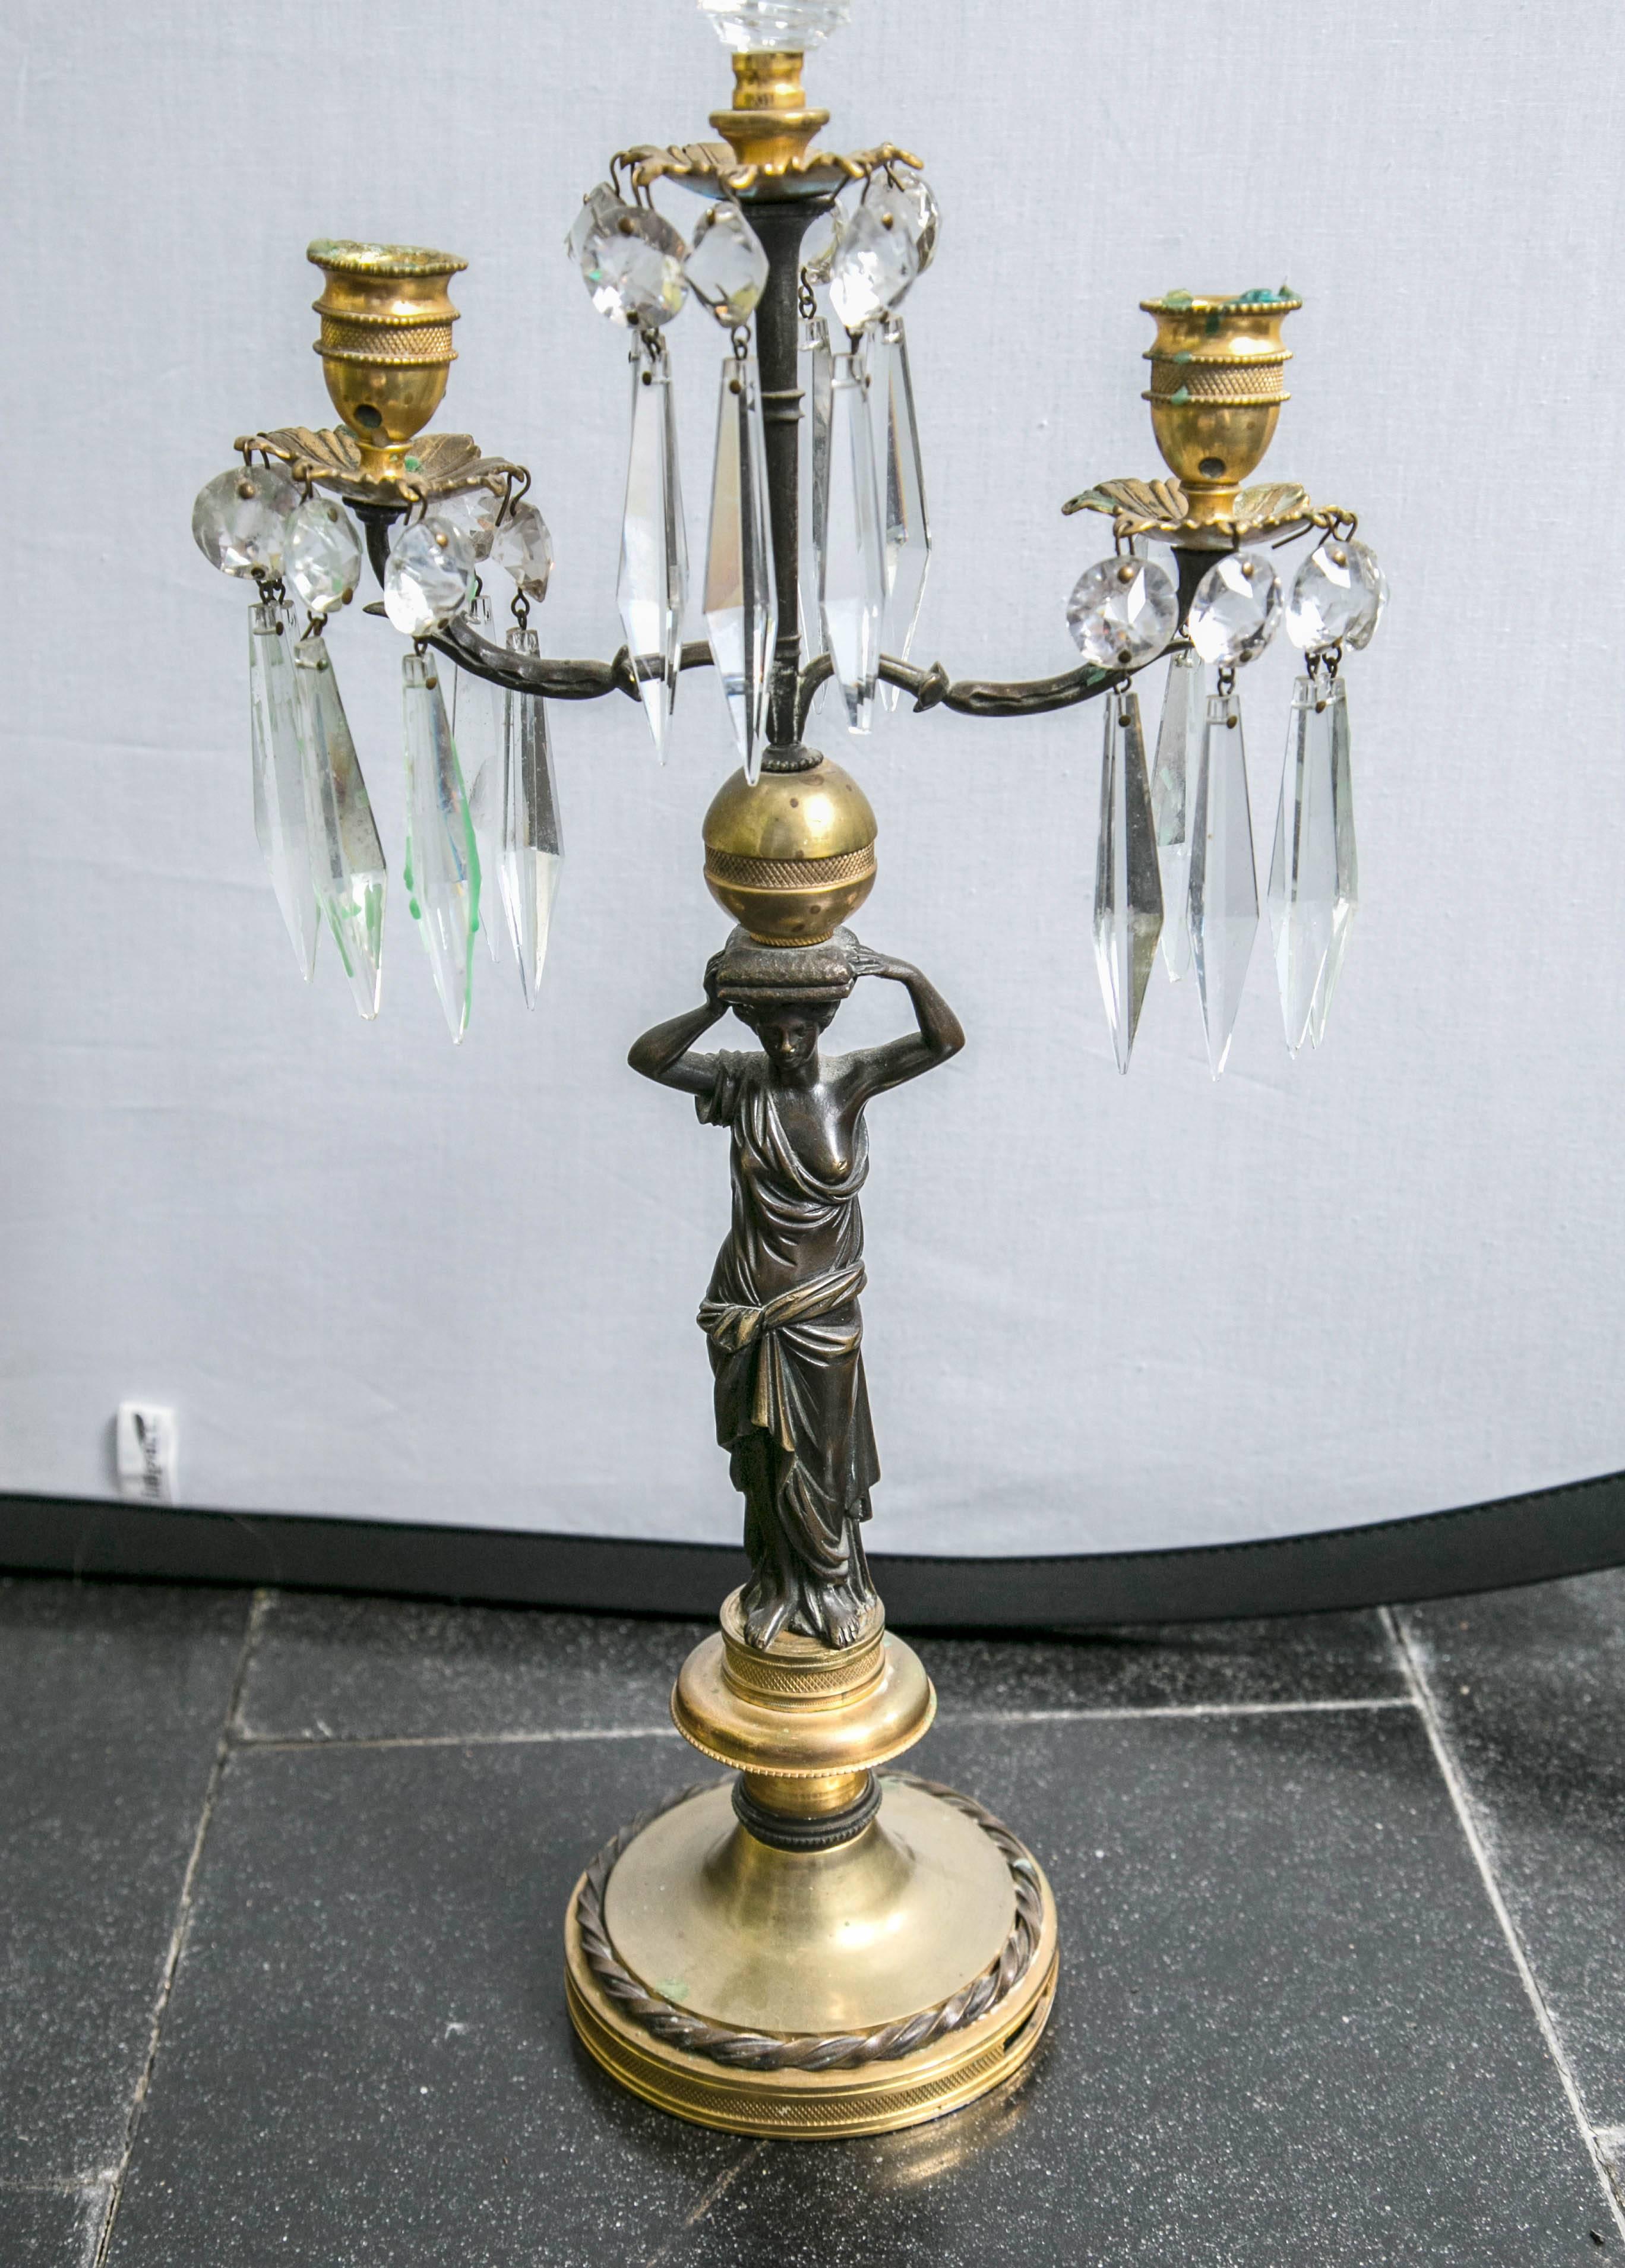 Lovely pair of three light candlesticks in gilt bronze with crystal drops.